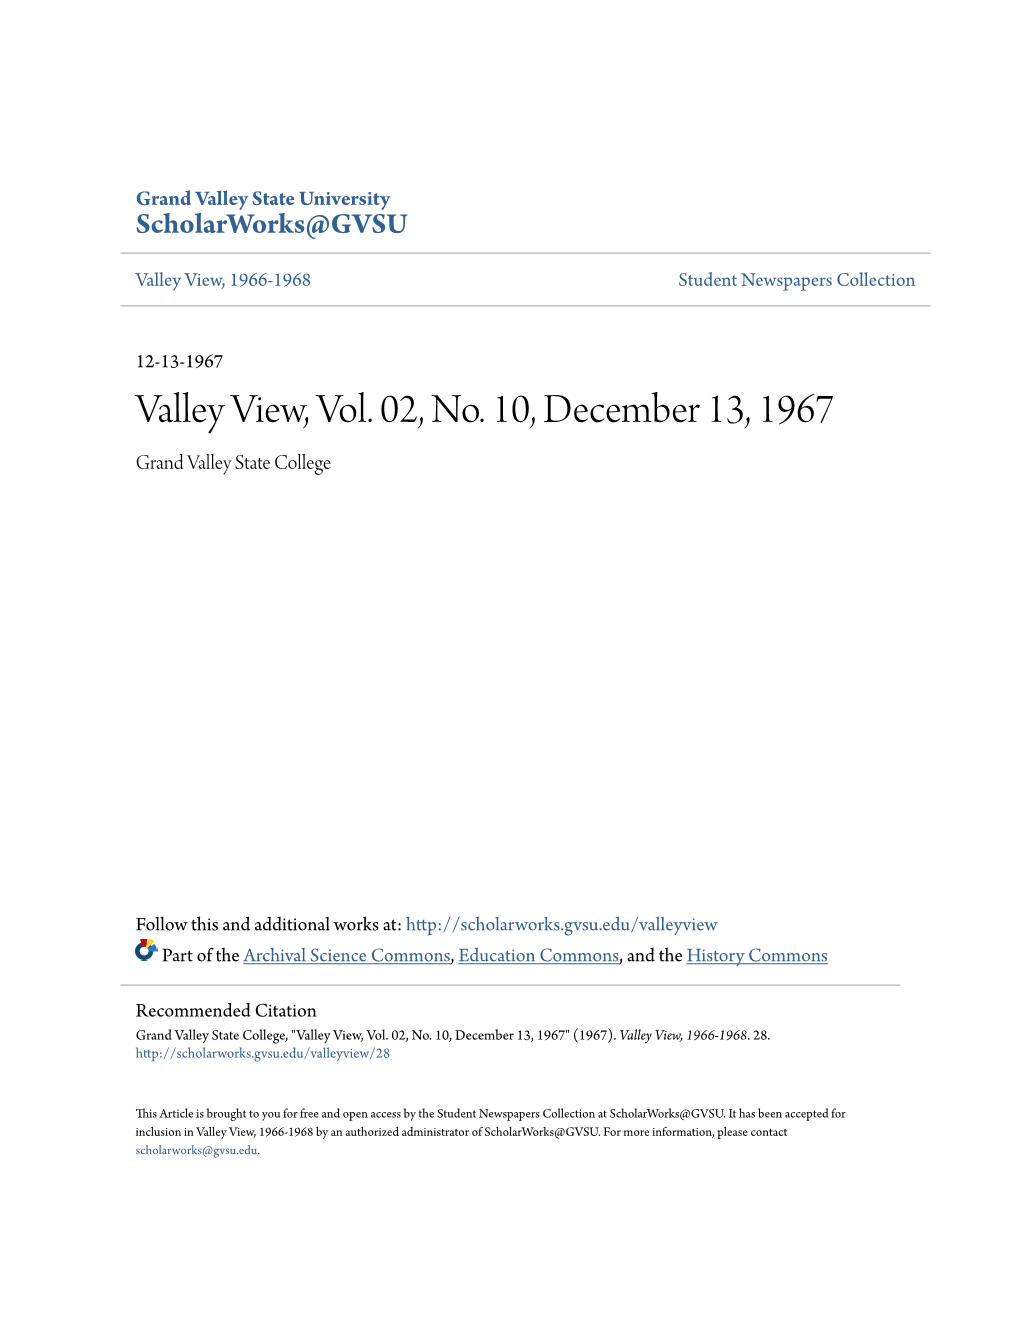 Valley View, Vol. 02, No. 10, December 13, 1967 Grand Valley State College